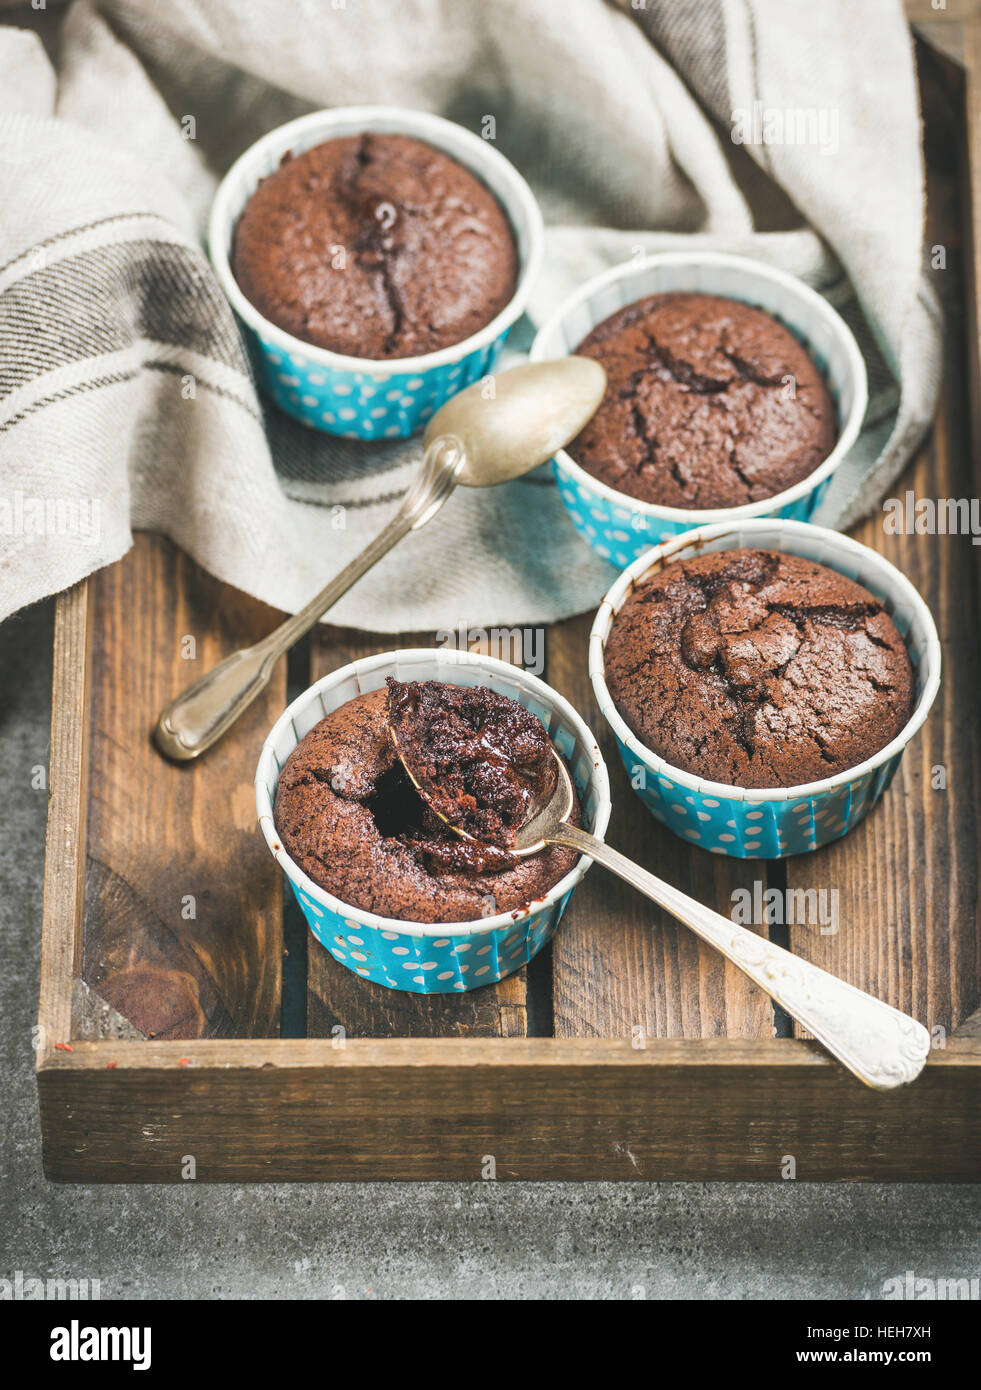 Chocolate souffle in blue individual baking cups in wooden serving tray over grey concrete background, selective focus Stock Photo